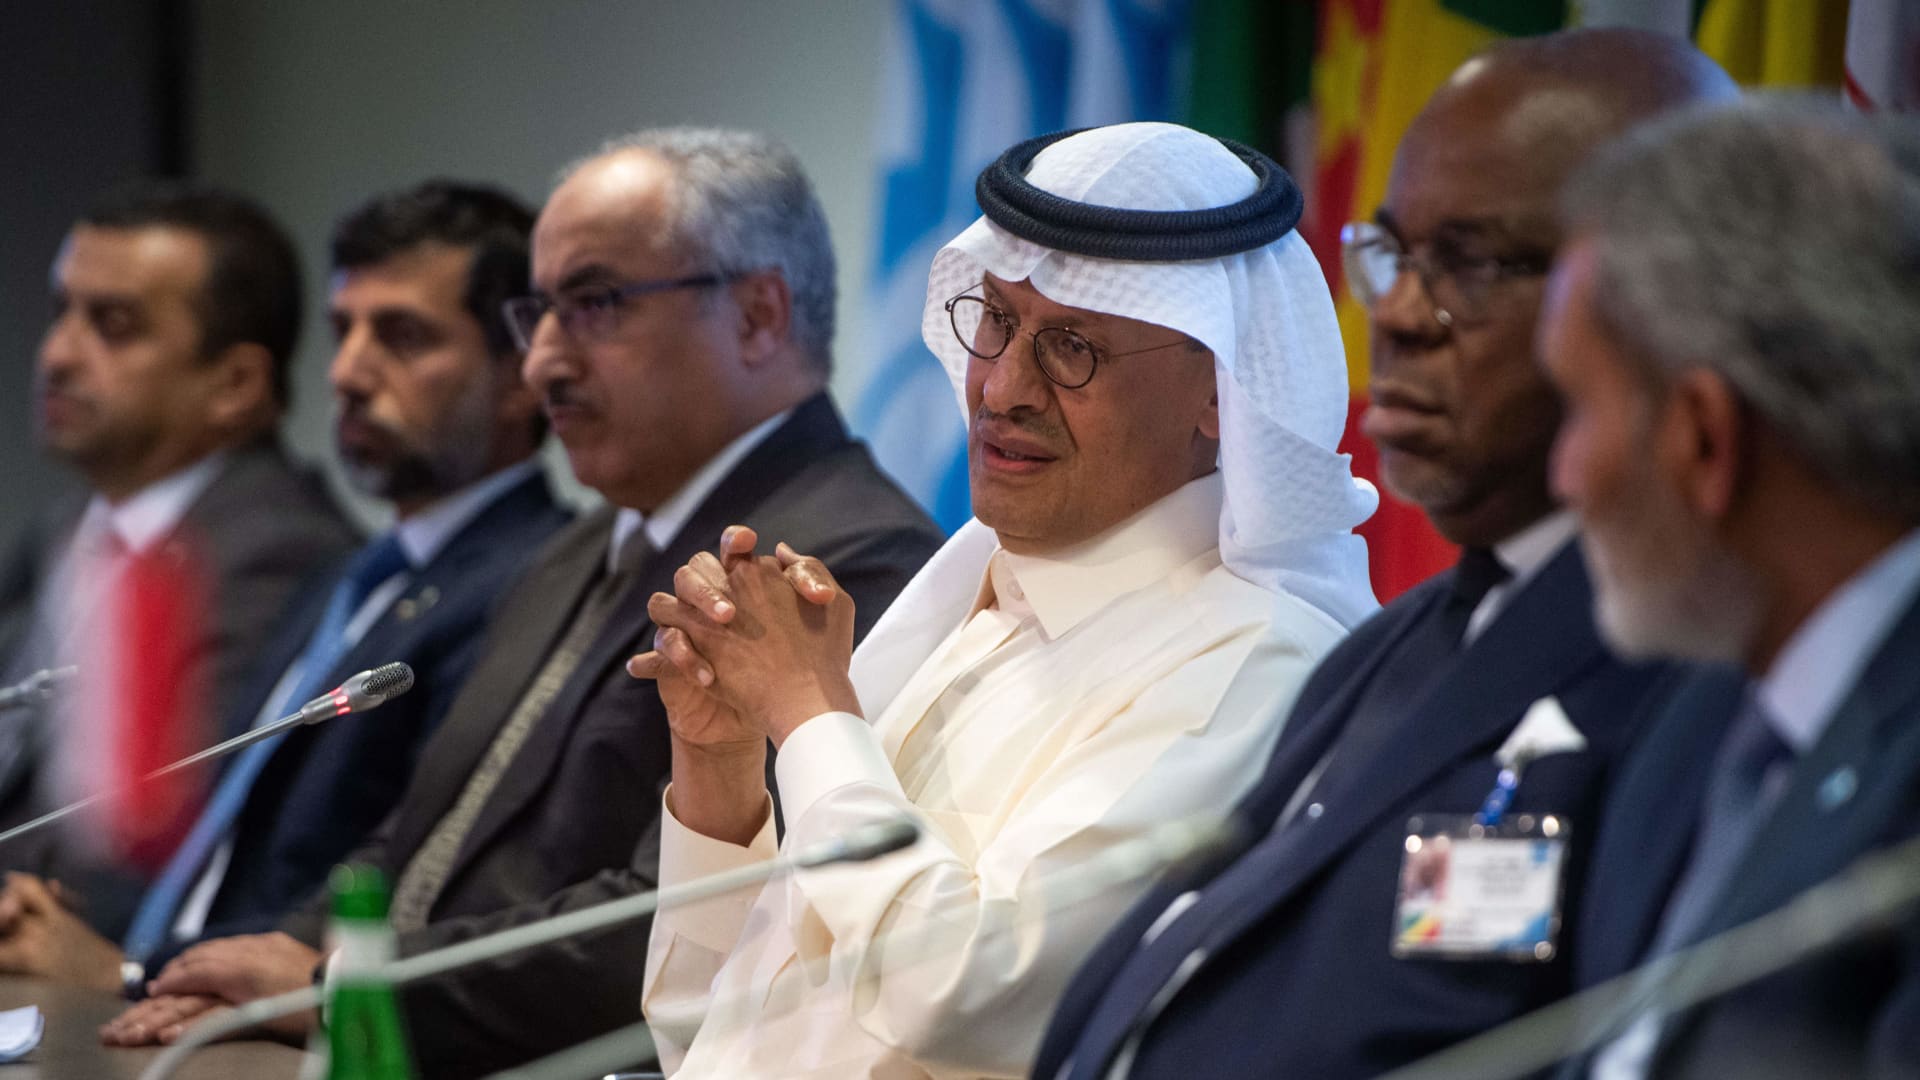 OPEC+ prepares for weekend meeting after Saudi warns speculators to ‘watch out’